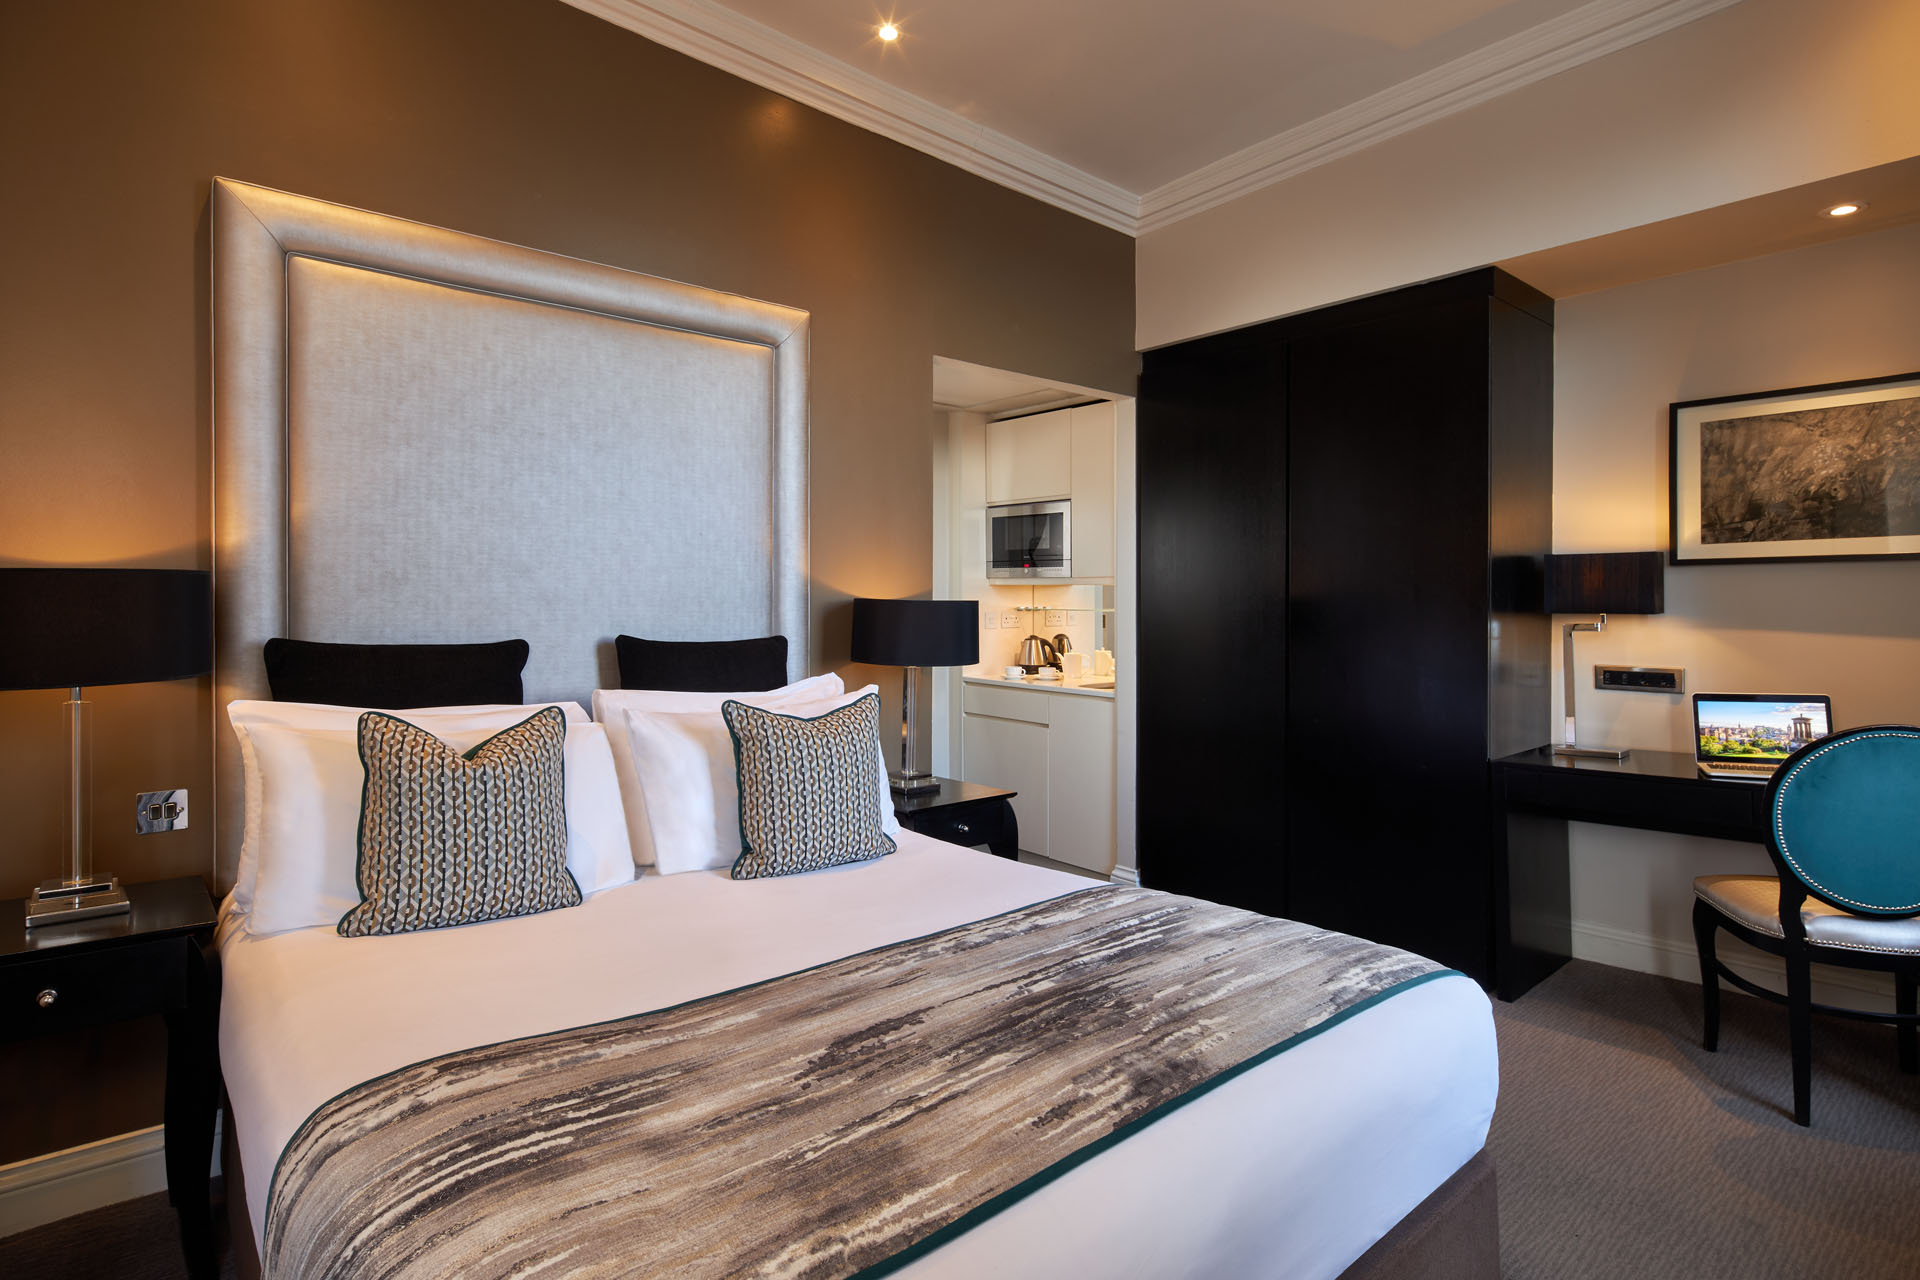 Overview of Fraser Suites Edinburgh family friendly hotel apartments